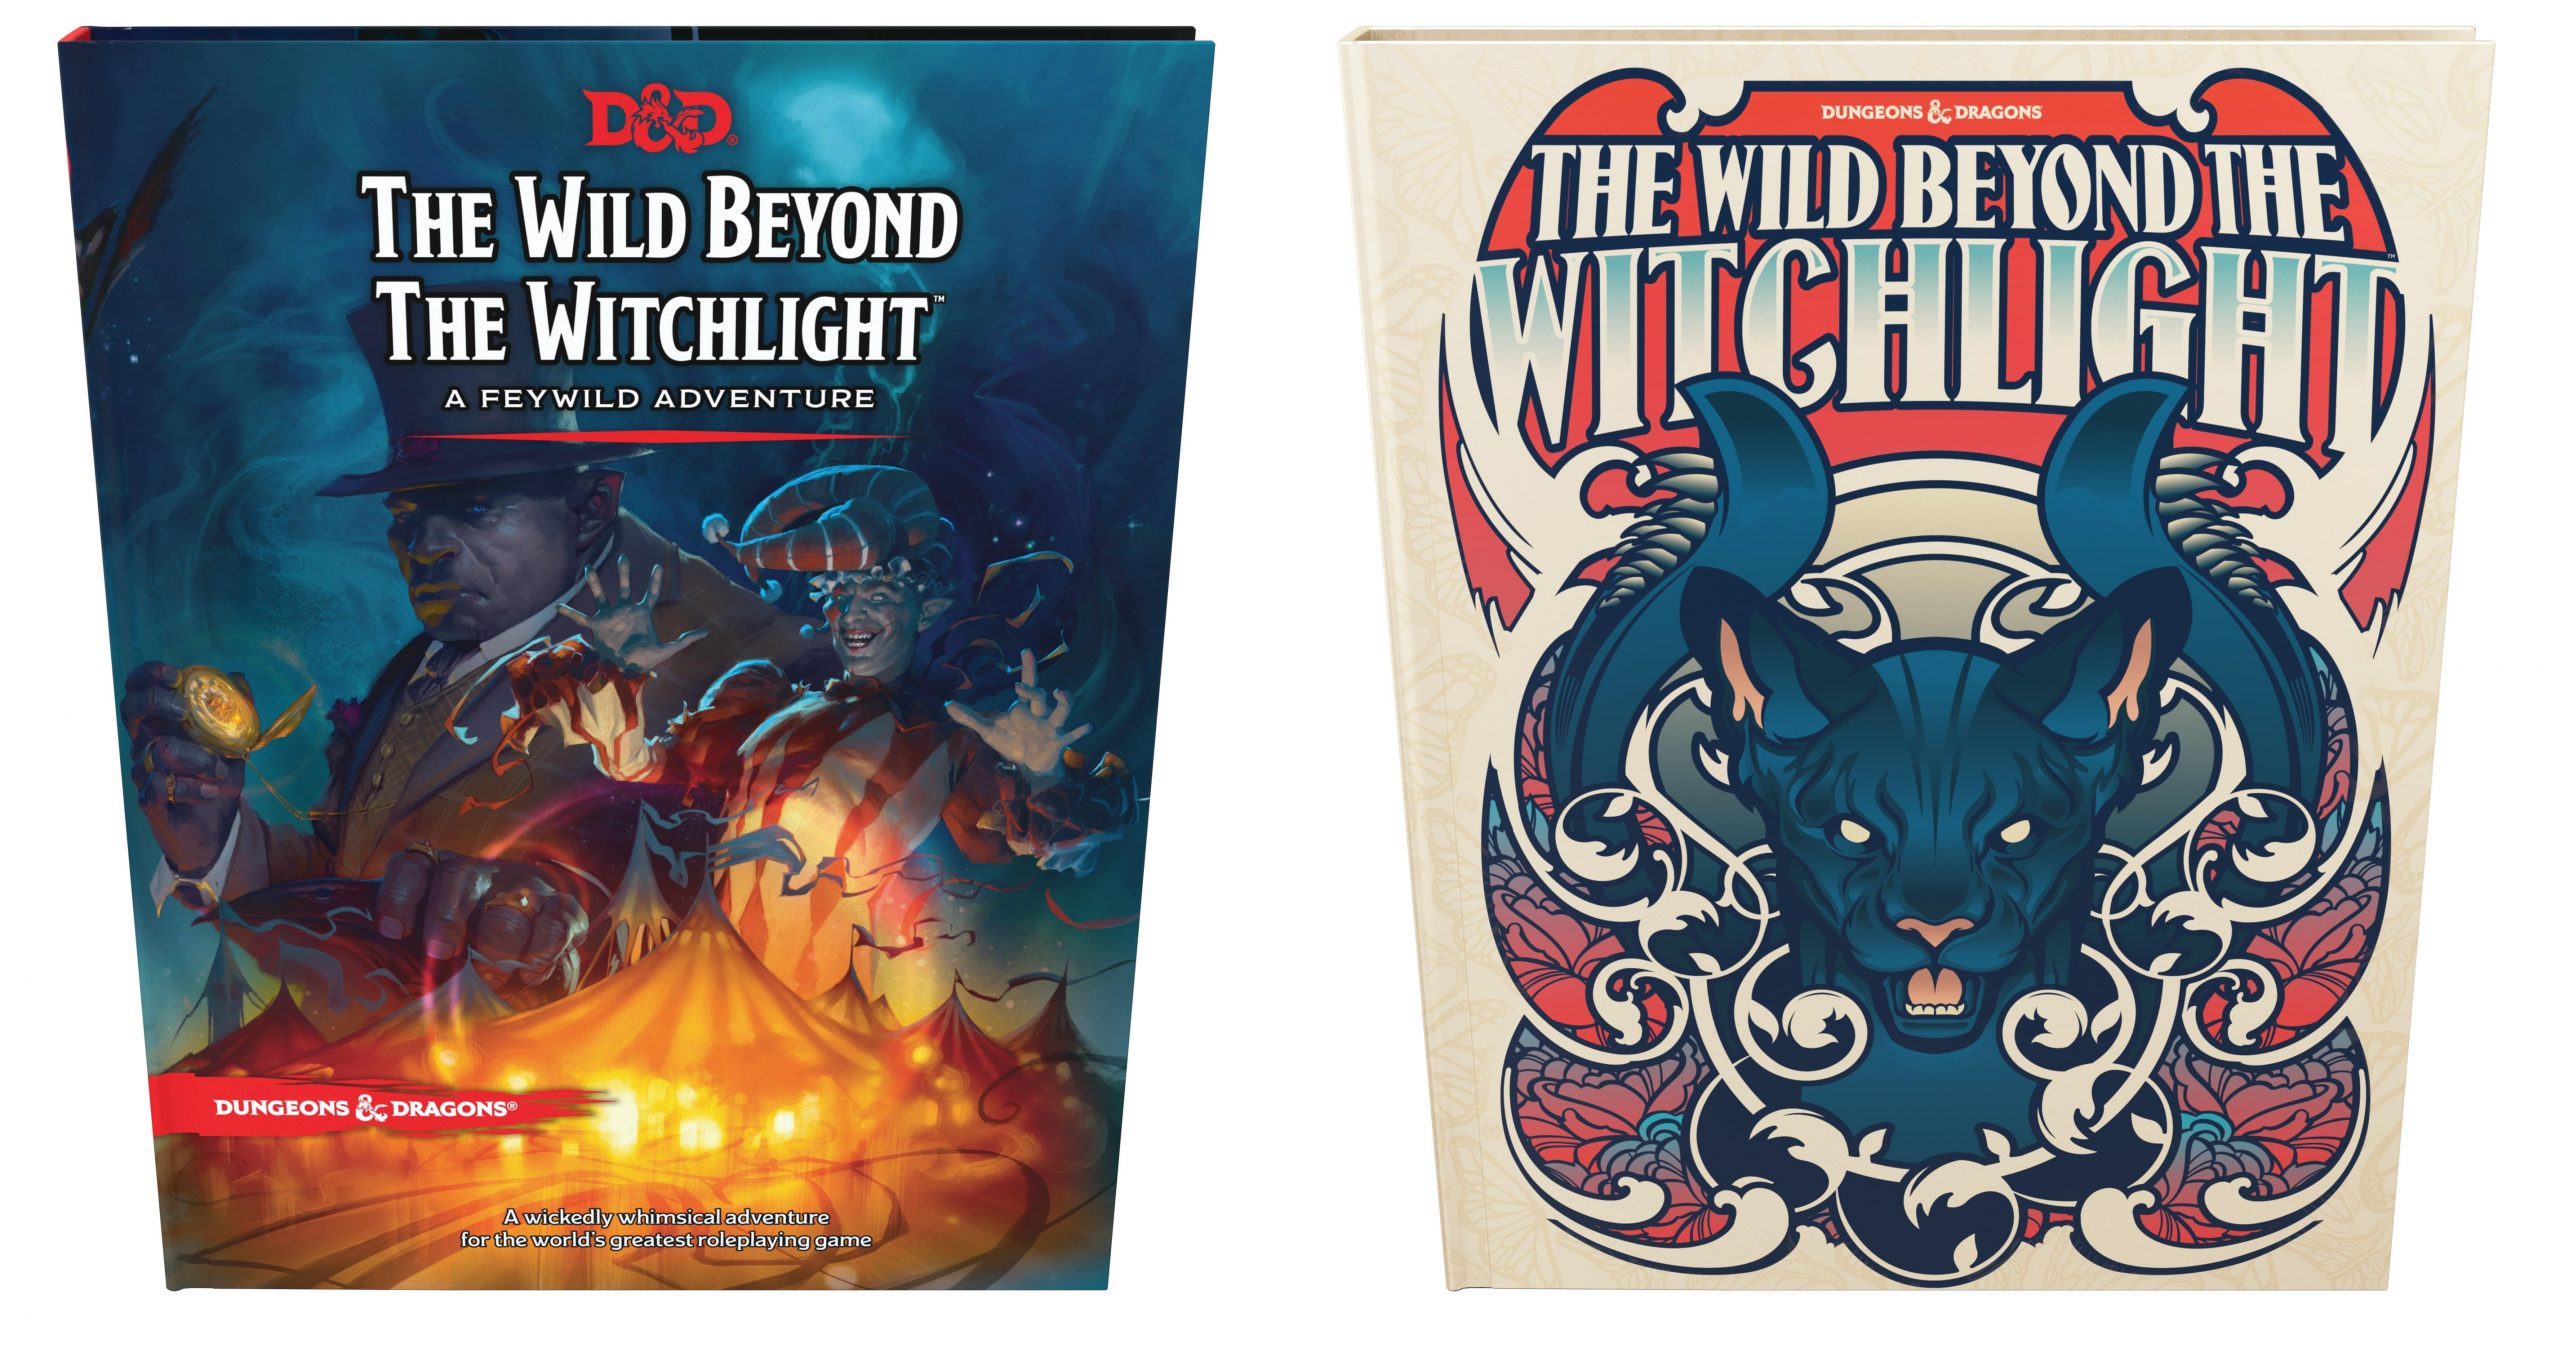 d&d the wild beyond the witchlight pdf free download